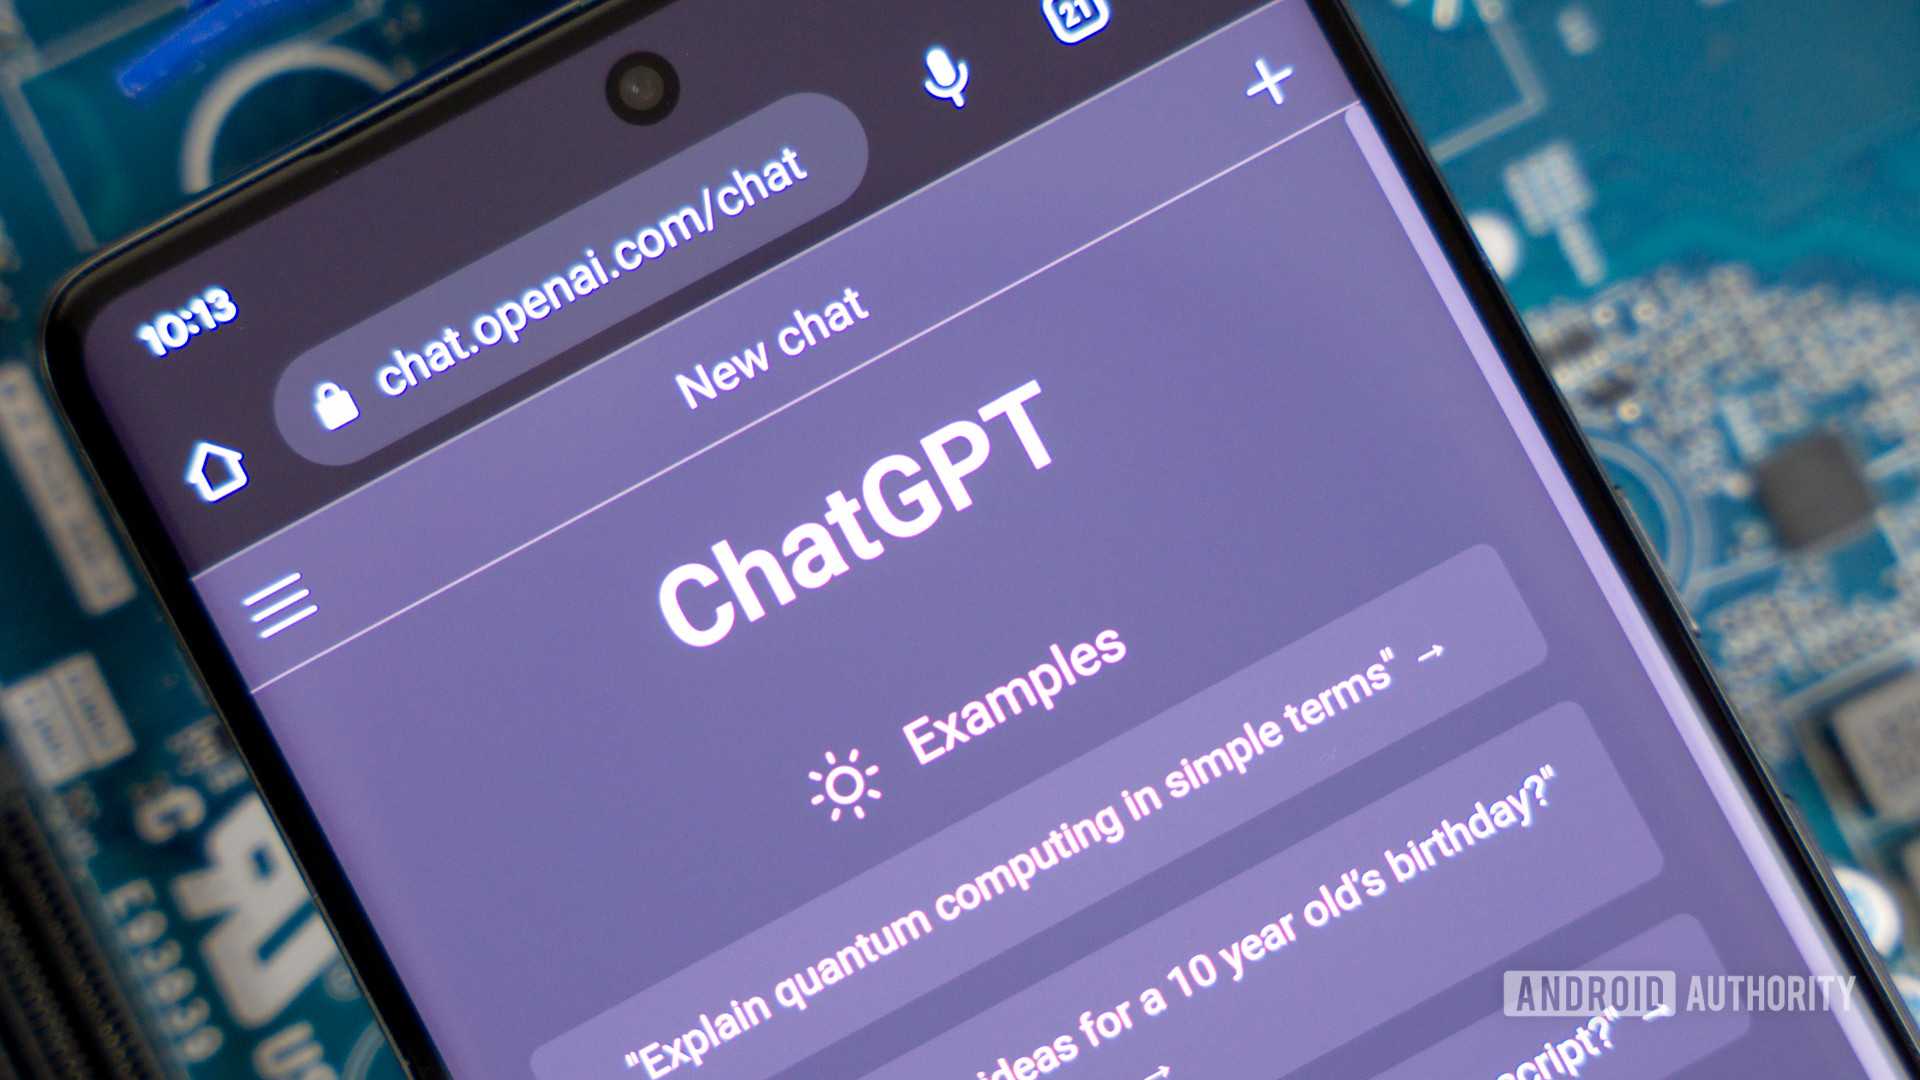 ChatGPT iOS app expands to over 40 countries